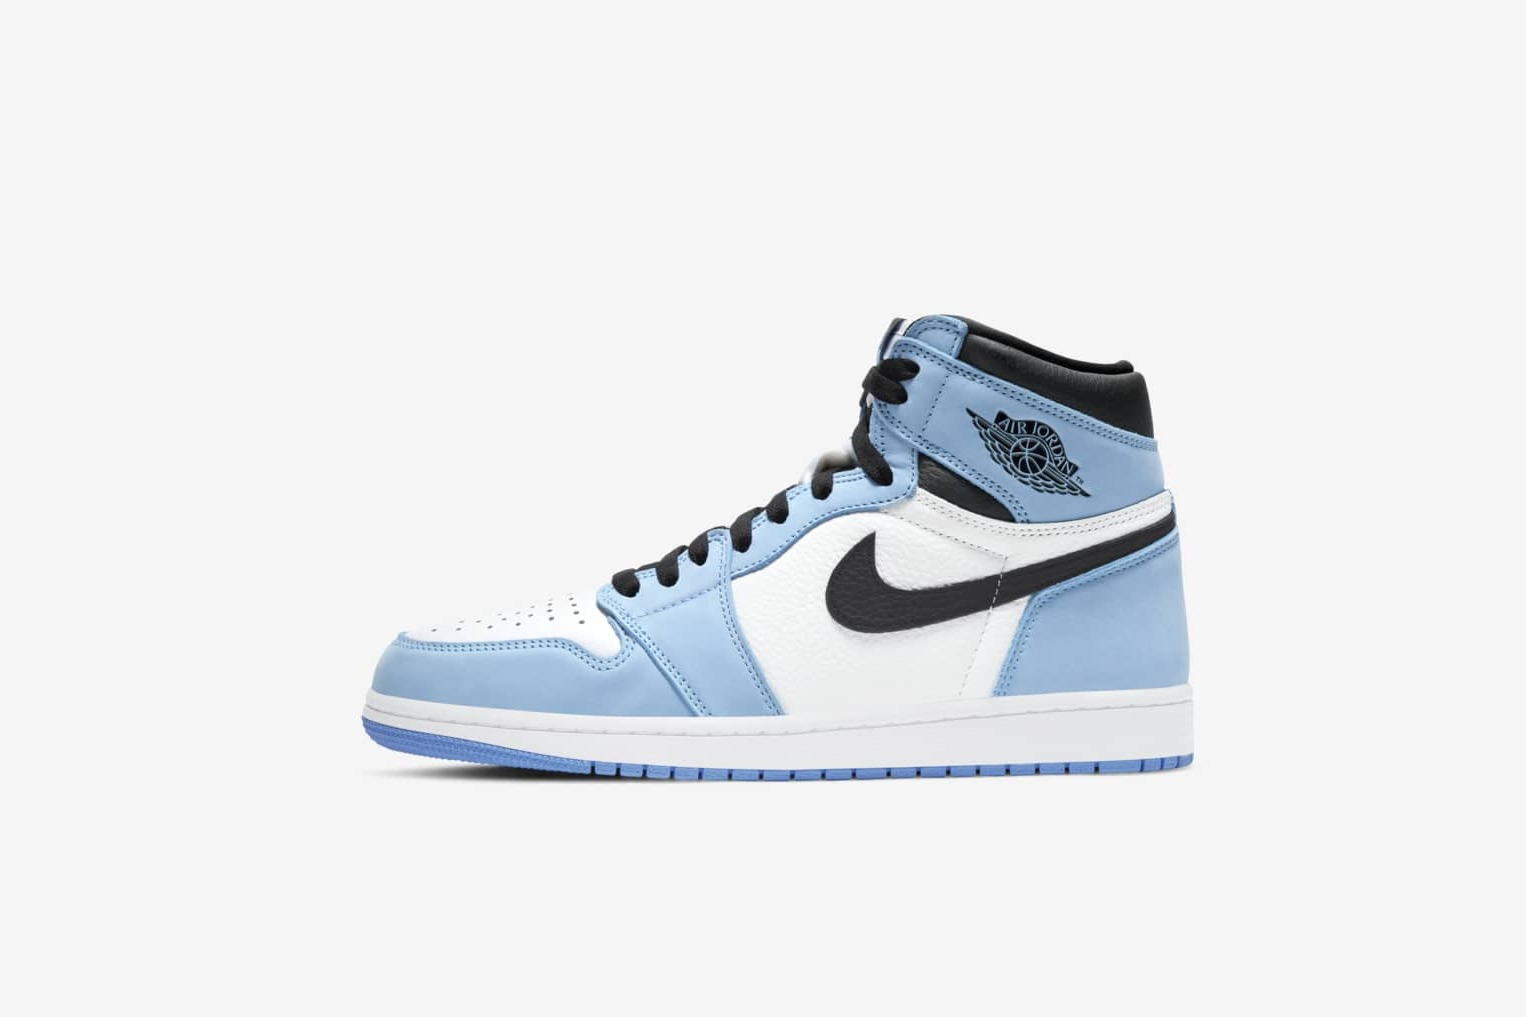 Air Jordan 1 Retro High Og University Blue Release Date Pics And Retail Price Bleacher Report Latest News Videos And Highlights